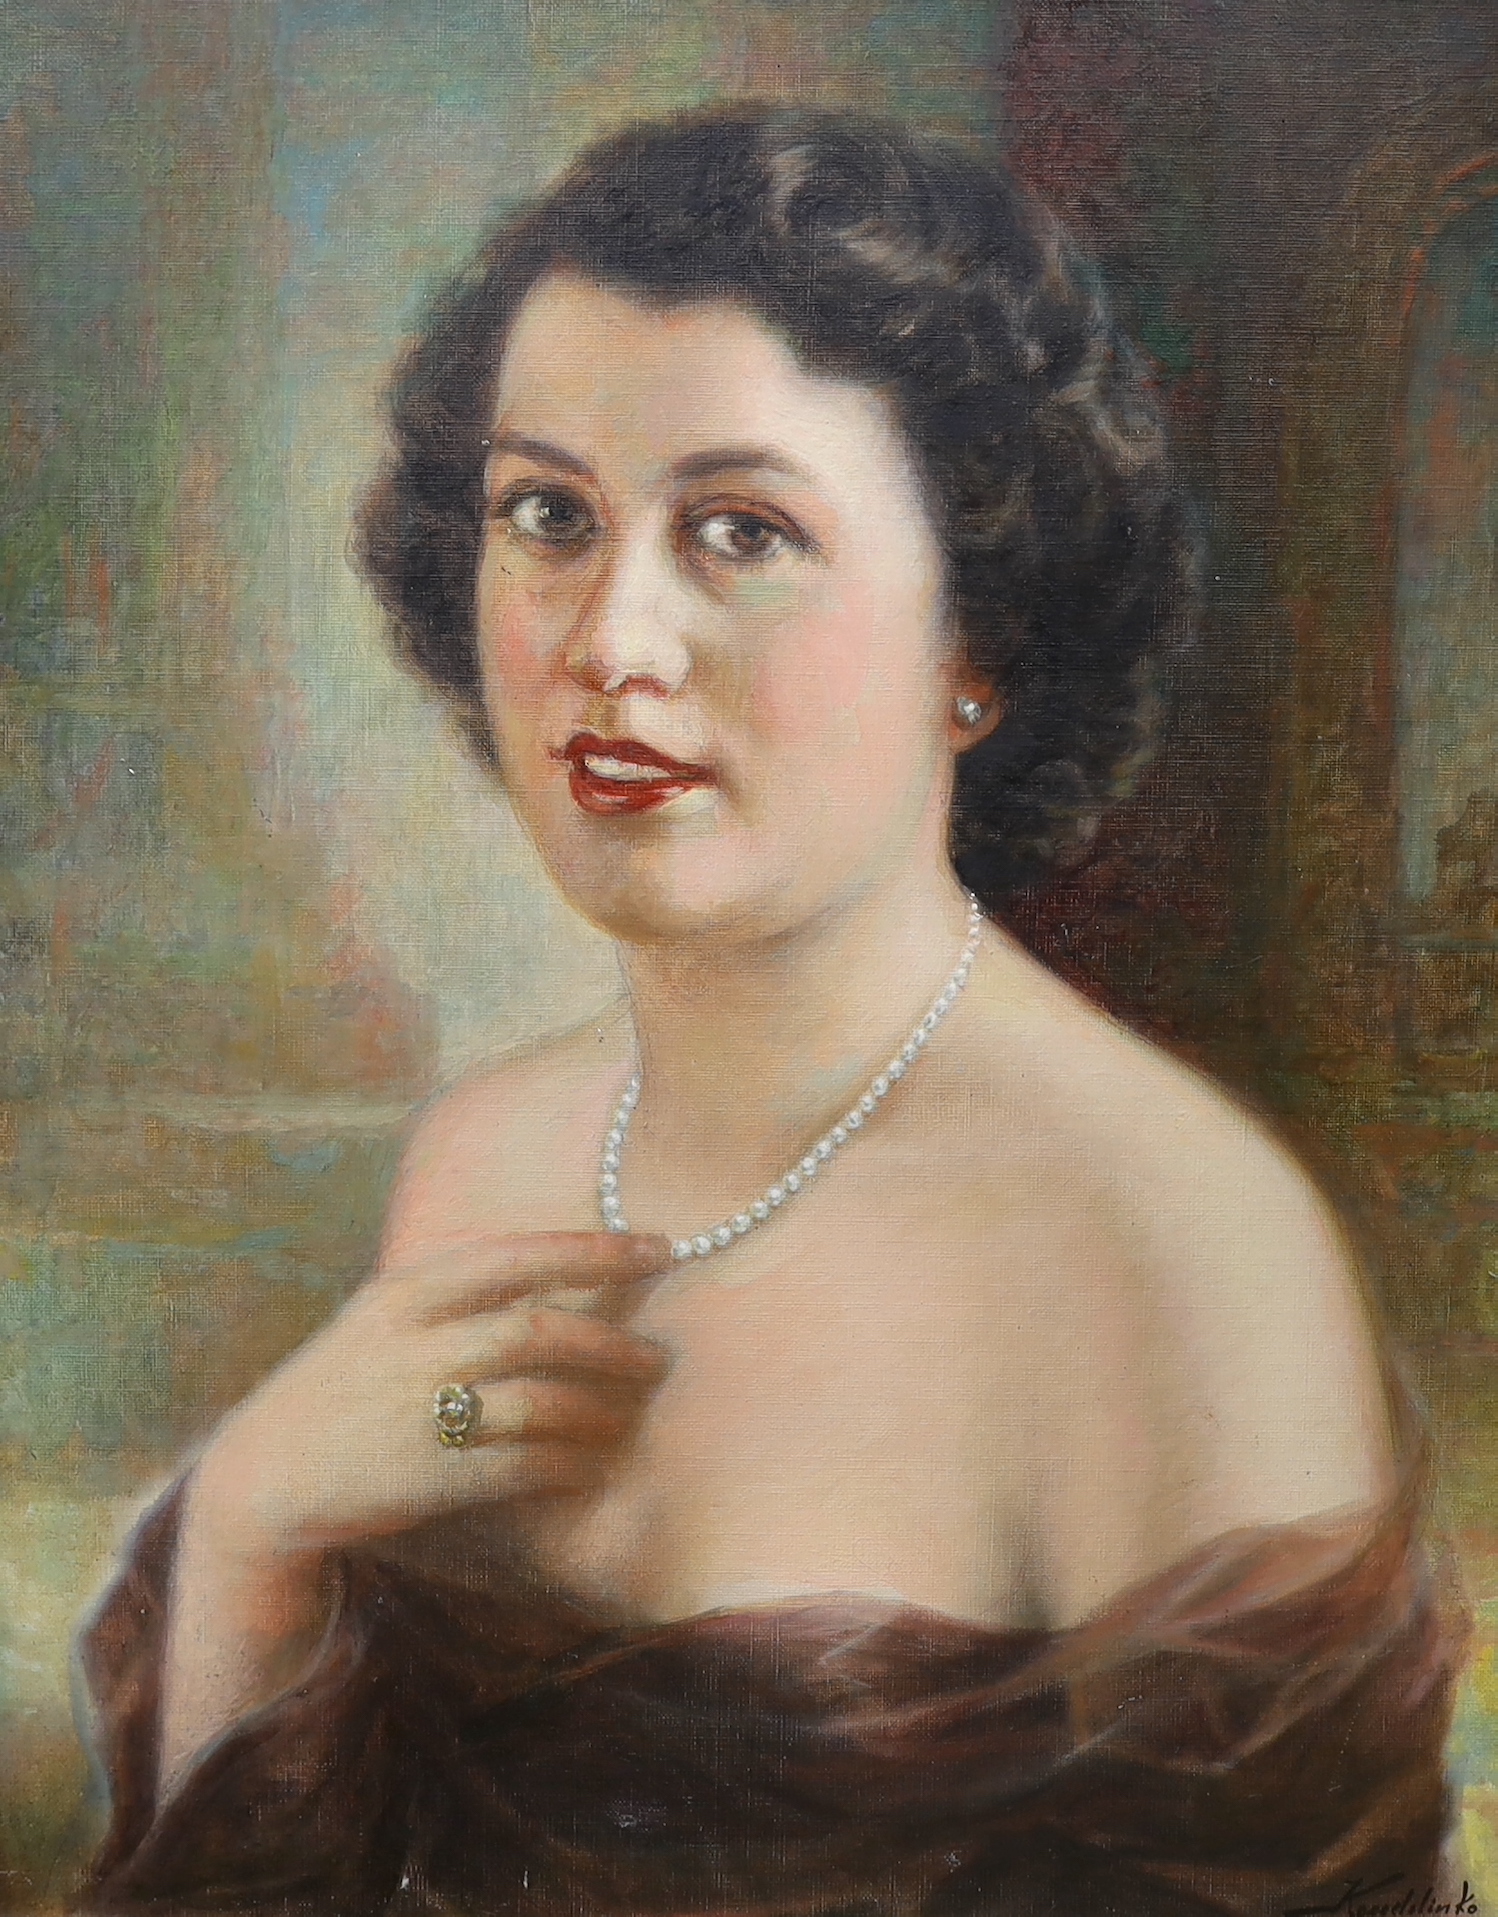 Kondelinko, oil on canvas, Portrait of a lady wearing a pearl necklace, signed, 59 x 48cm